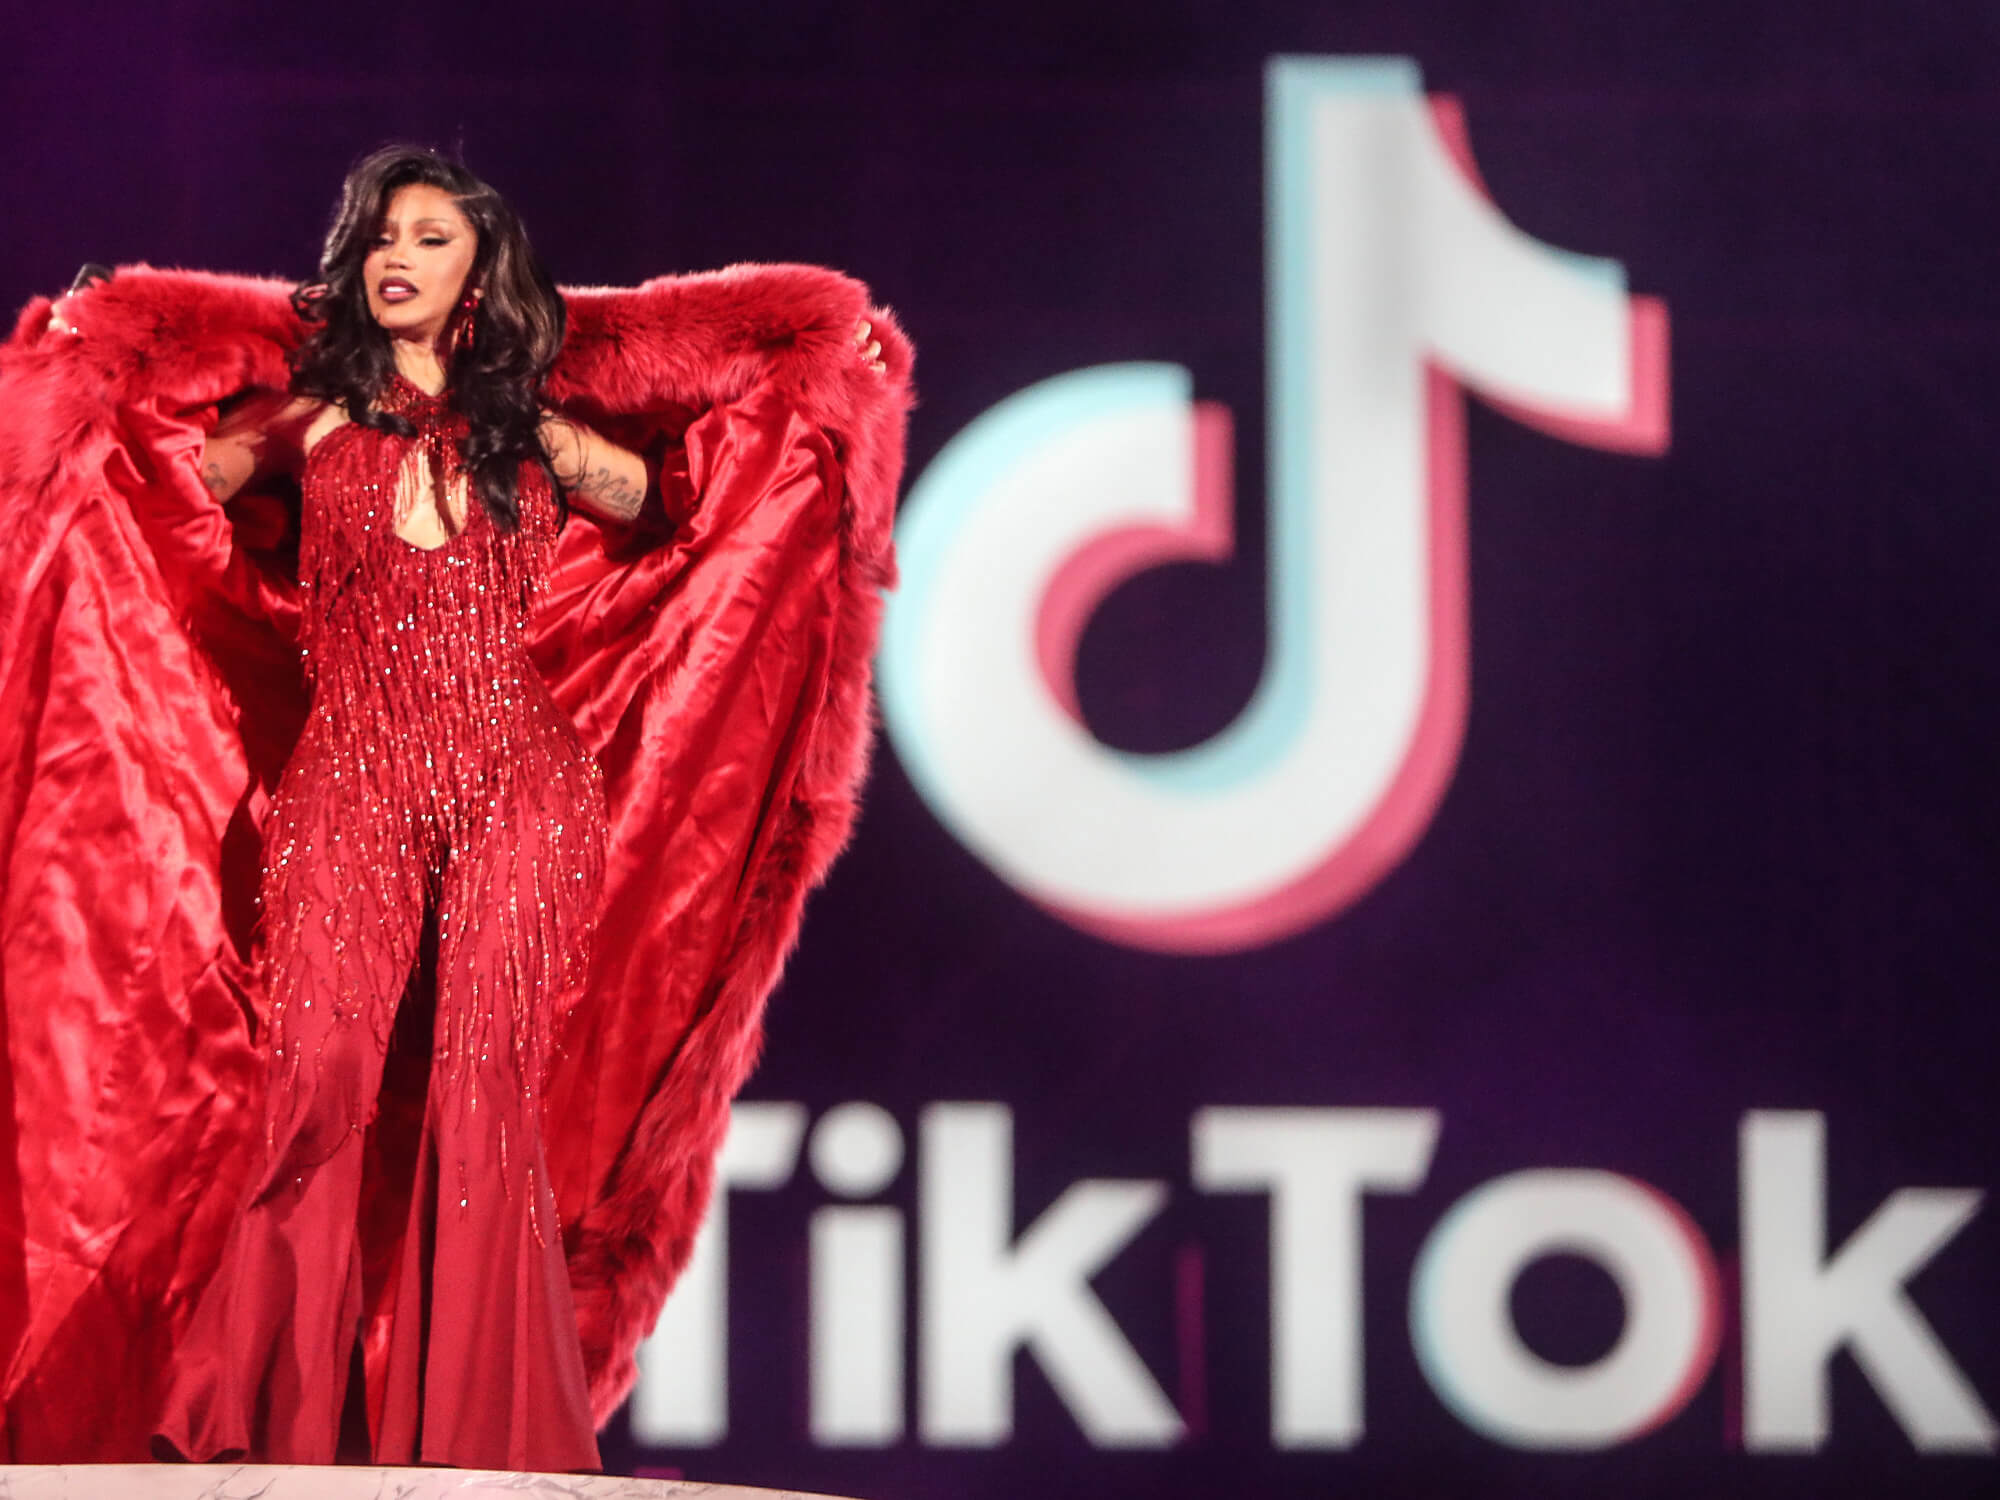 Cardi B on stage at TikTok In The Mix. She wears a vibrant red outfit and stands in front of the TikTok logo.